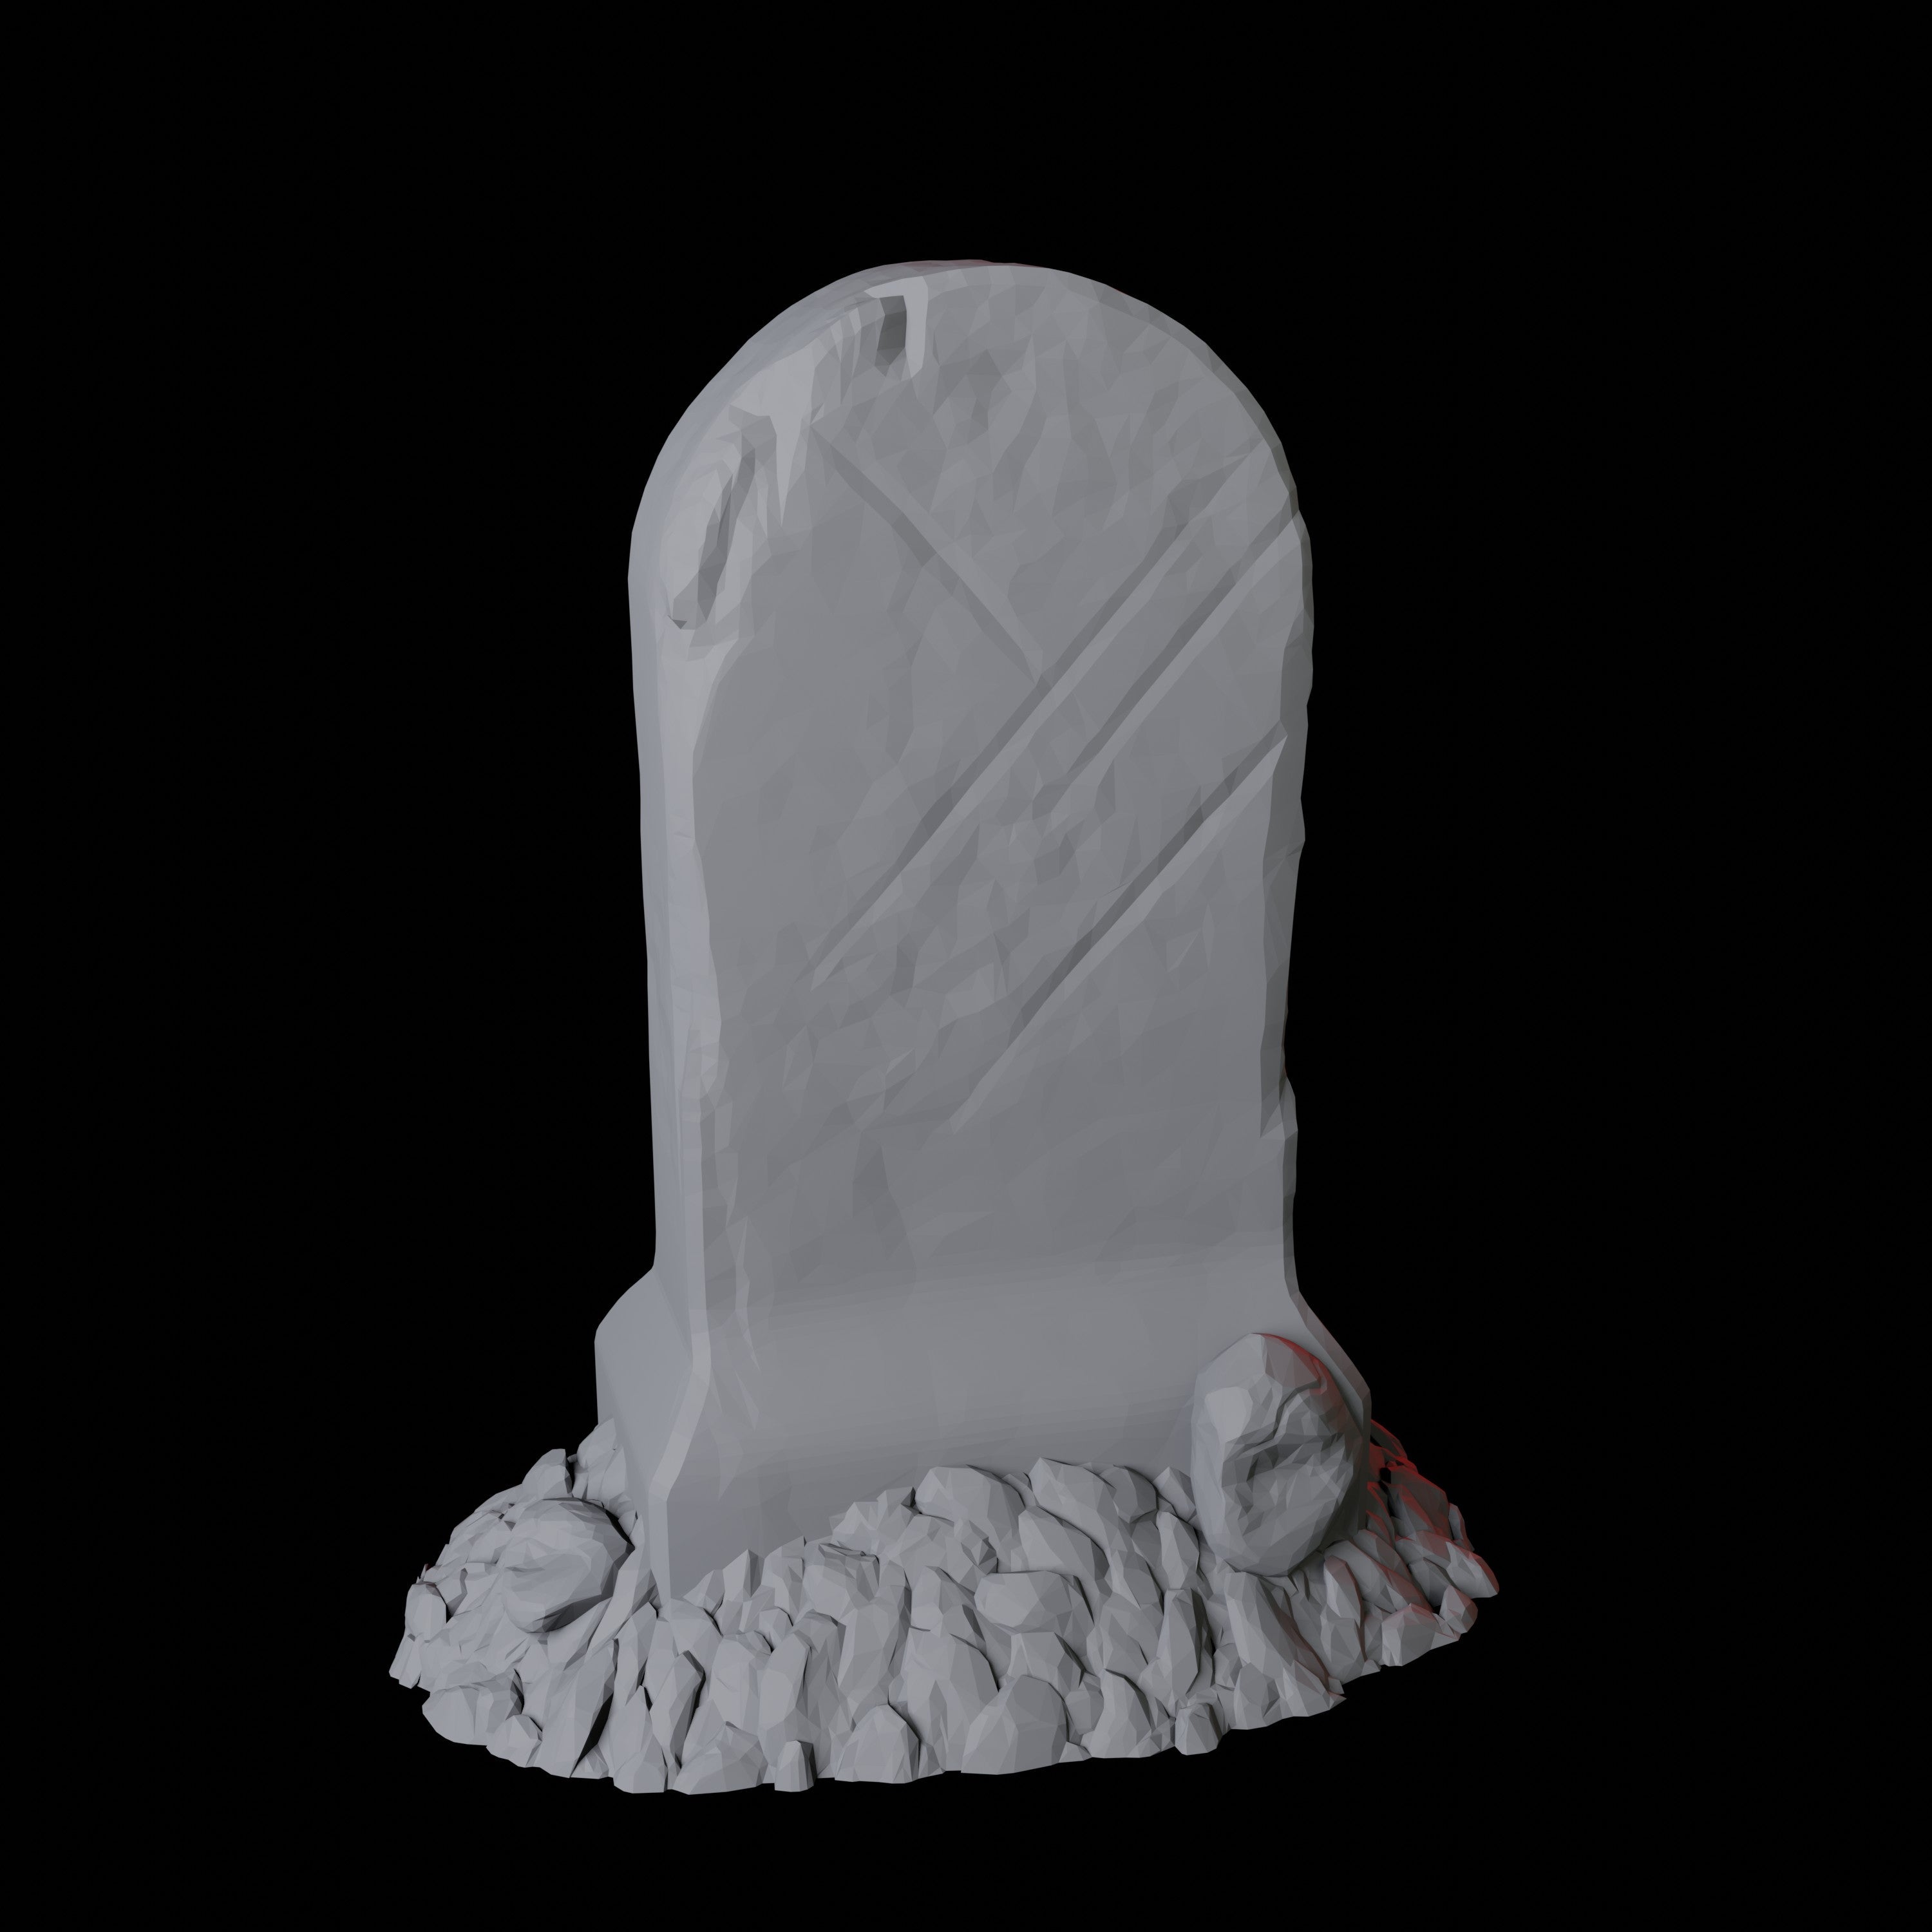 9 Tombstones - Scatter Terrain Miniature for Dungeons and Dragons - Myth Forged